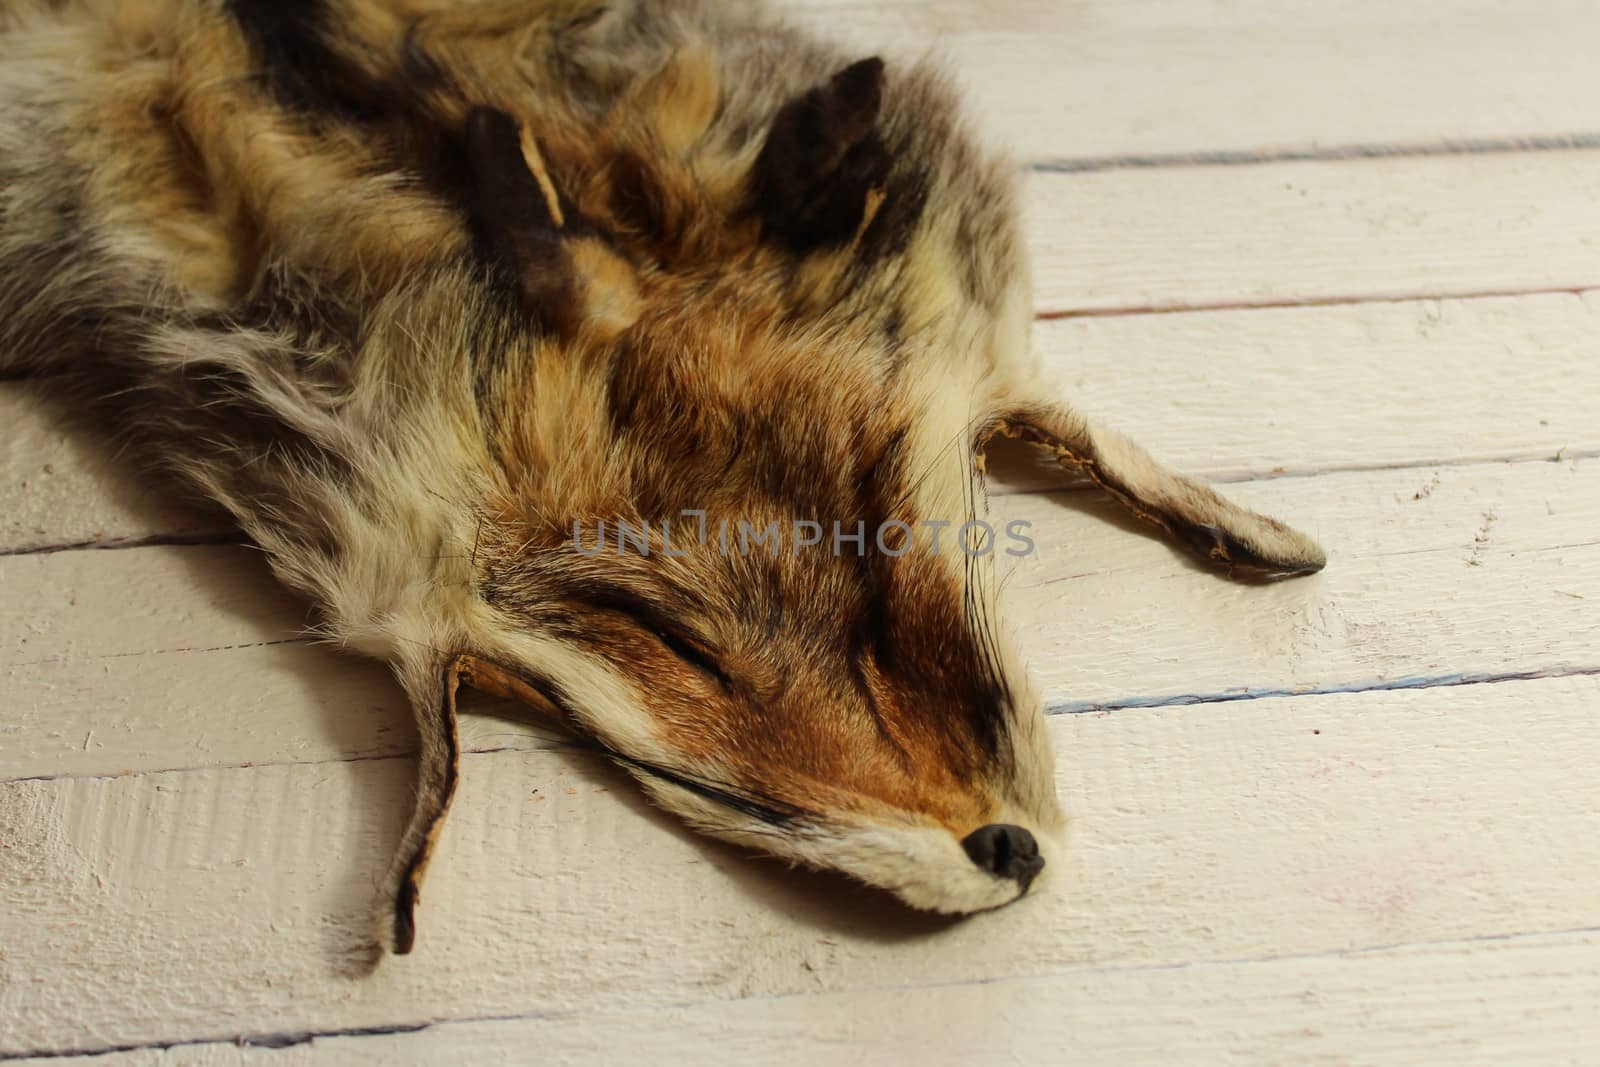 The picture shows a piece of a fox fur